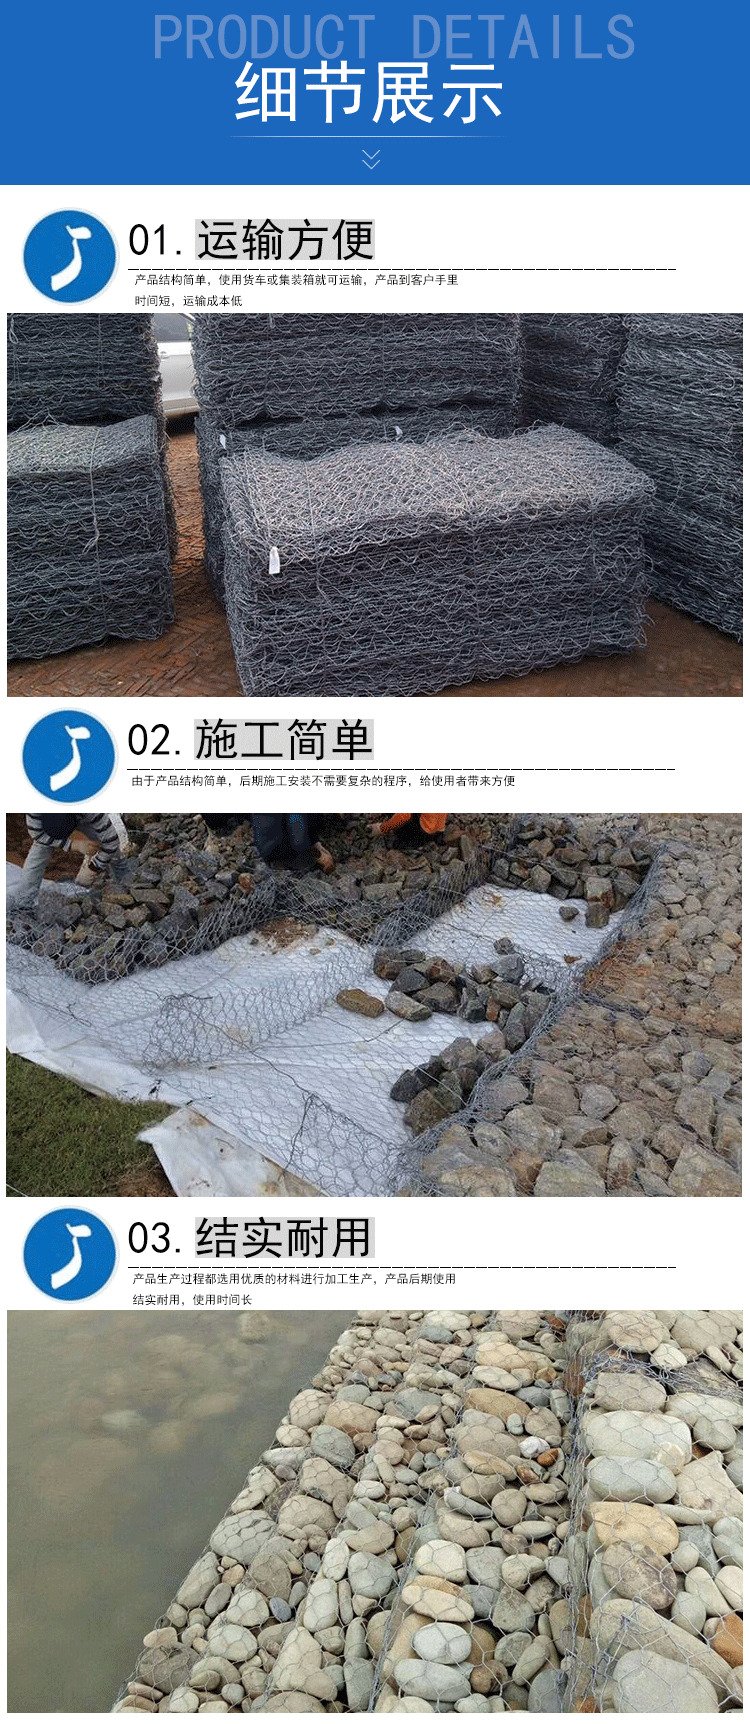 Water conservancy gabion mesh with high tensile strength, river gabion mesh, hot-dip galvanized Renault pad entity manufacturer